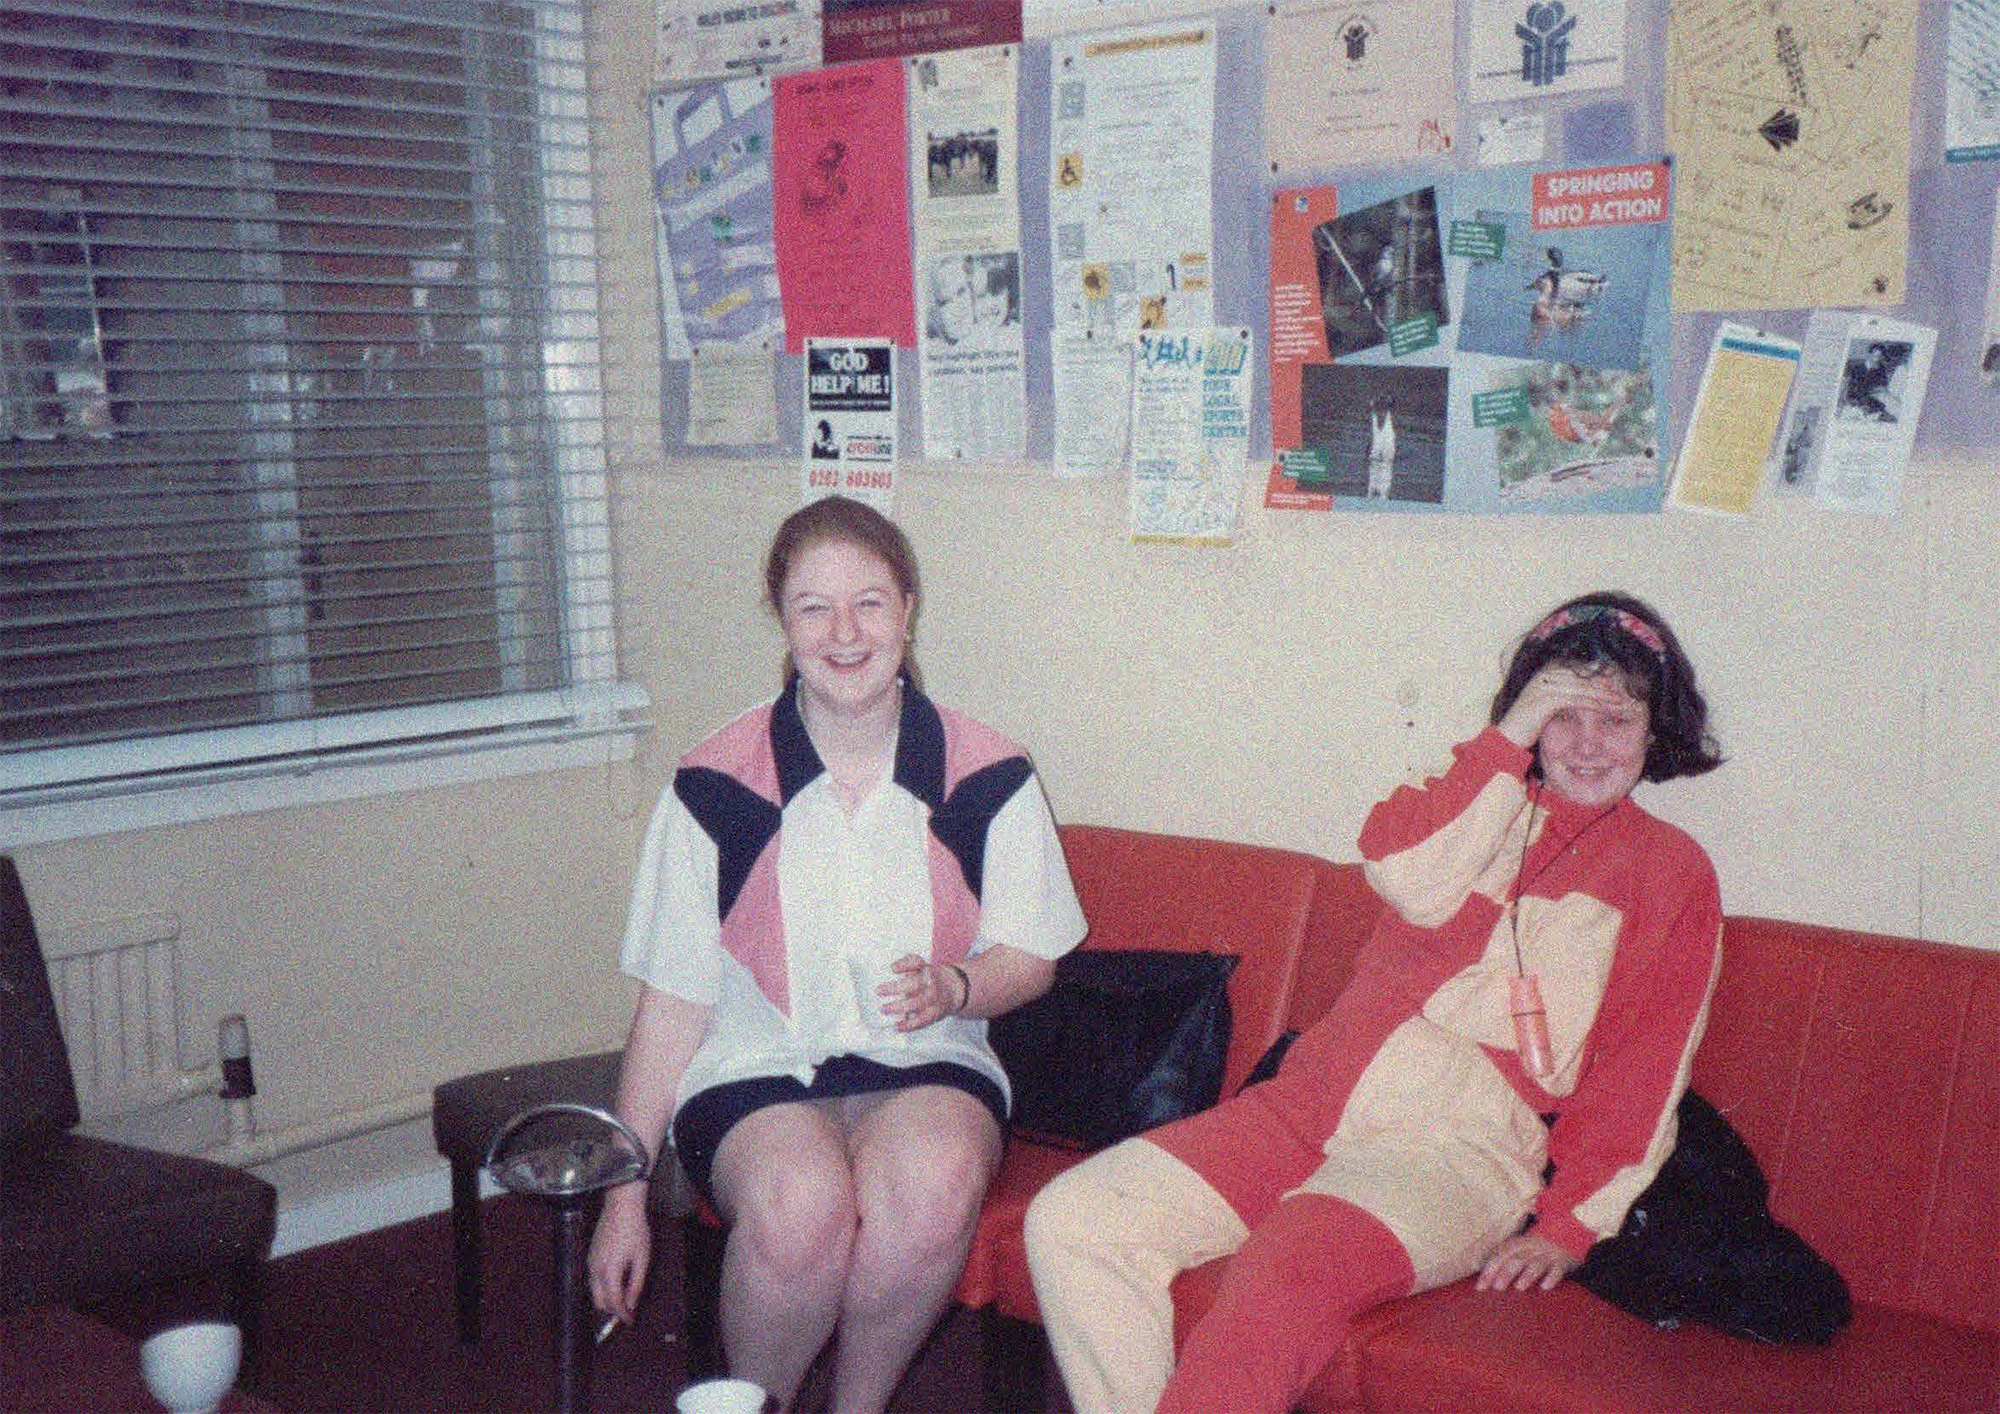 Two older girls or young women sitting on chairs under a notice board, smiling towards the camera. They are wearing bright 80s or early 90s style block colour clothing.